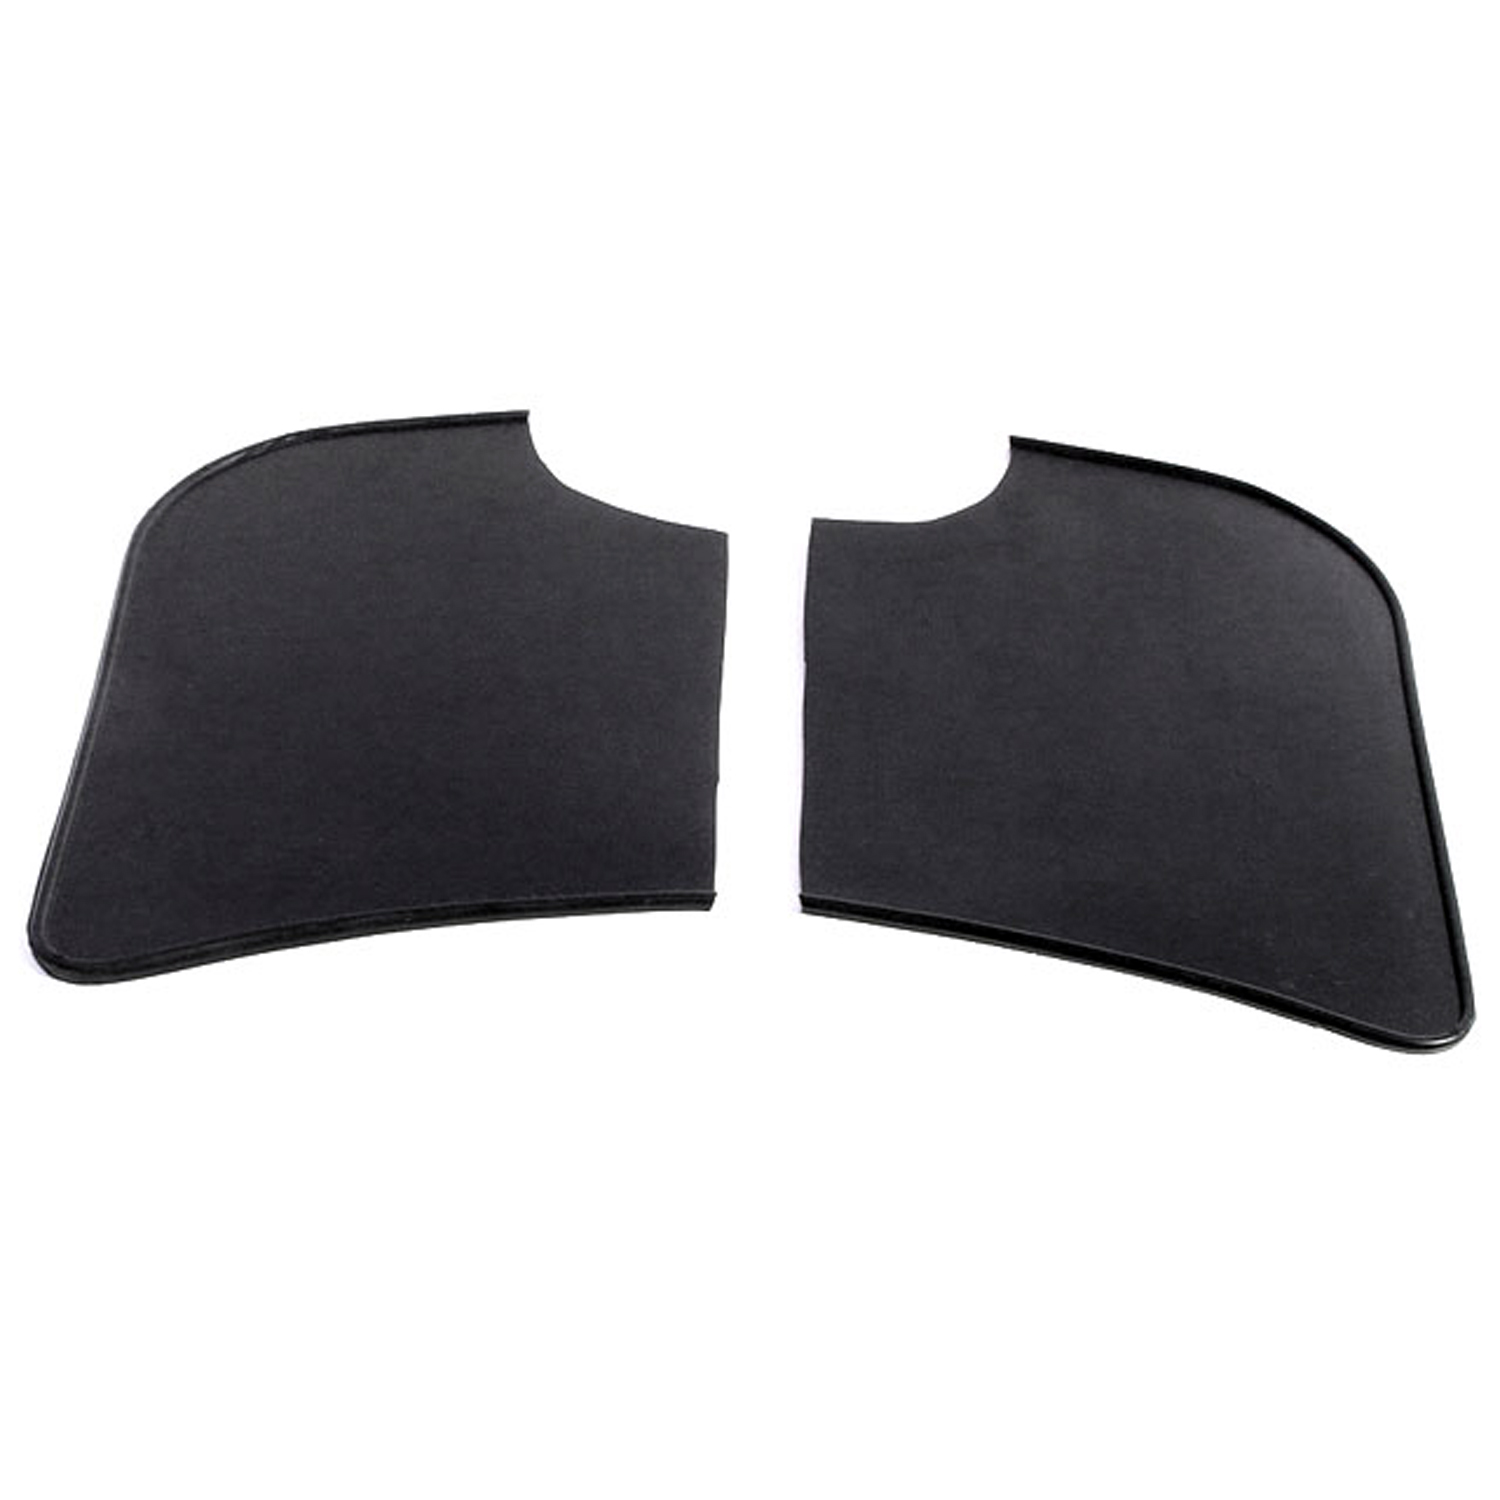 1978 Volkswagen Rabbit Gravel Shields.  Molded flat without metal backing plates-FS 40